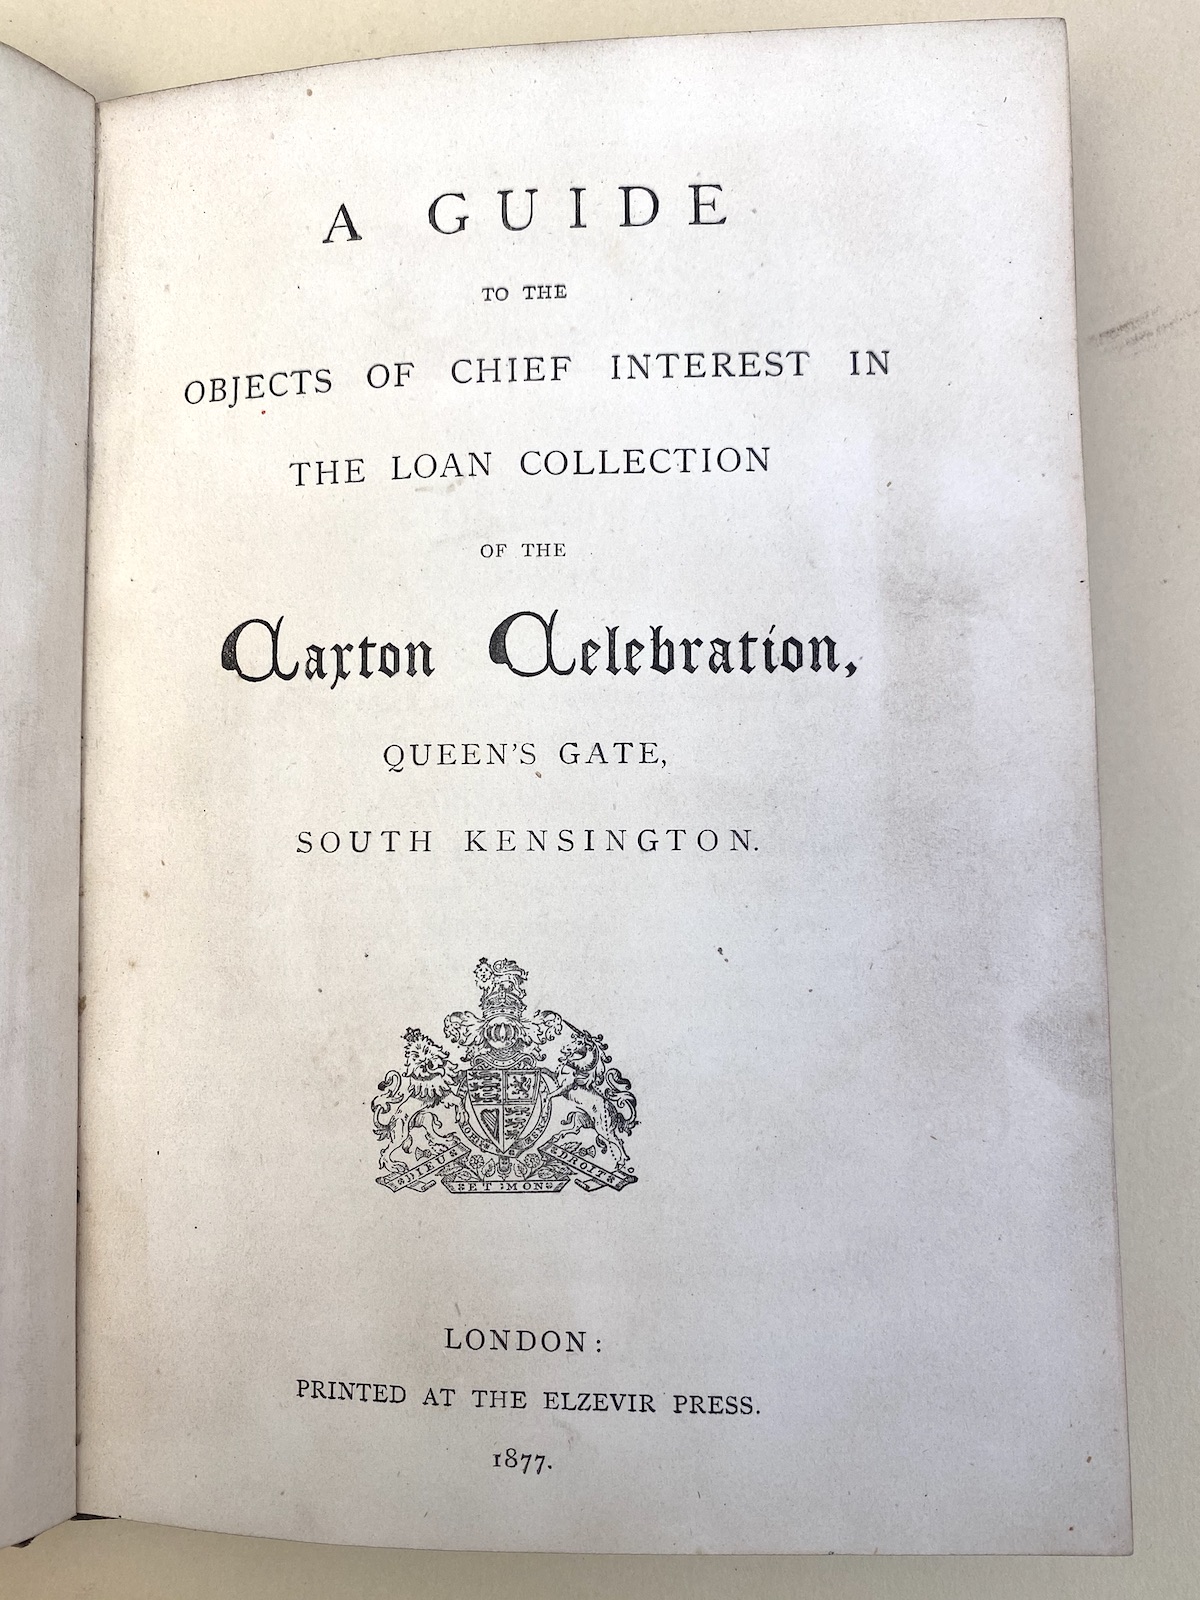 Title page of Guide to Objects of Chief Interest at the Caxton Celebration